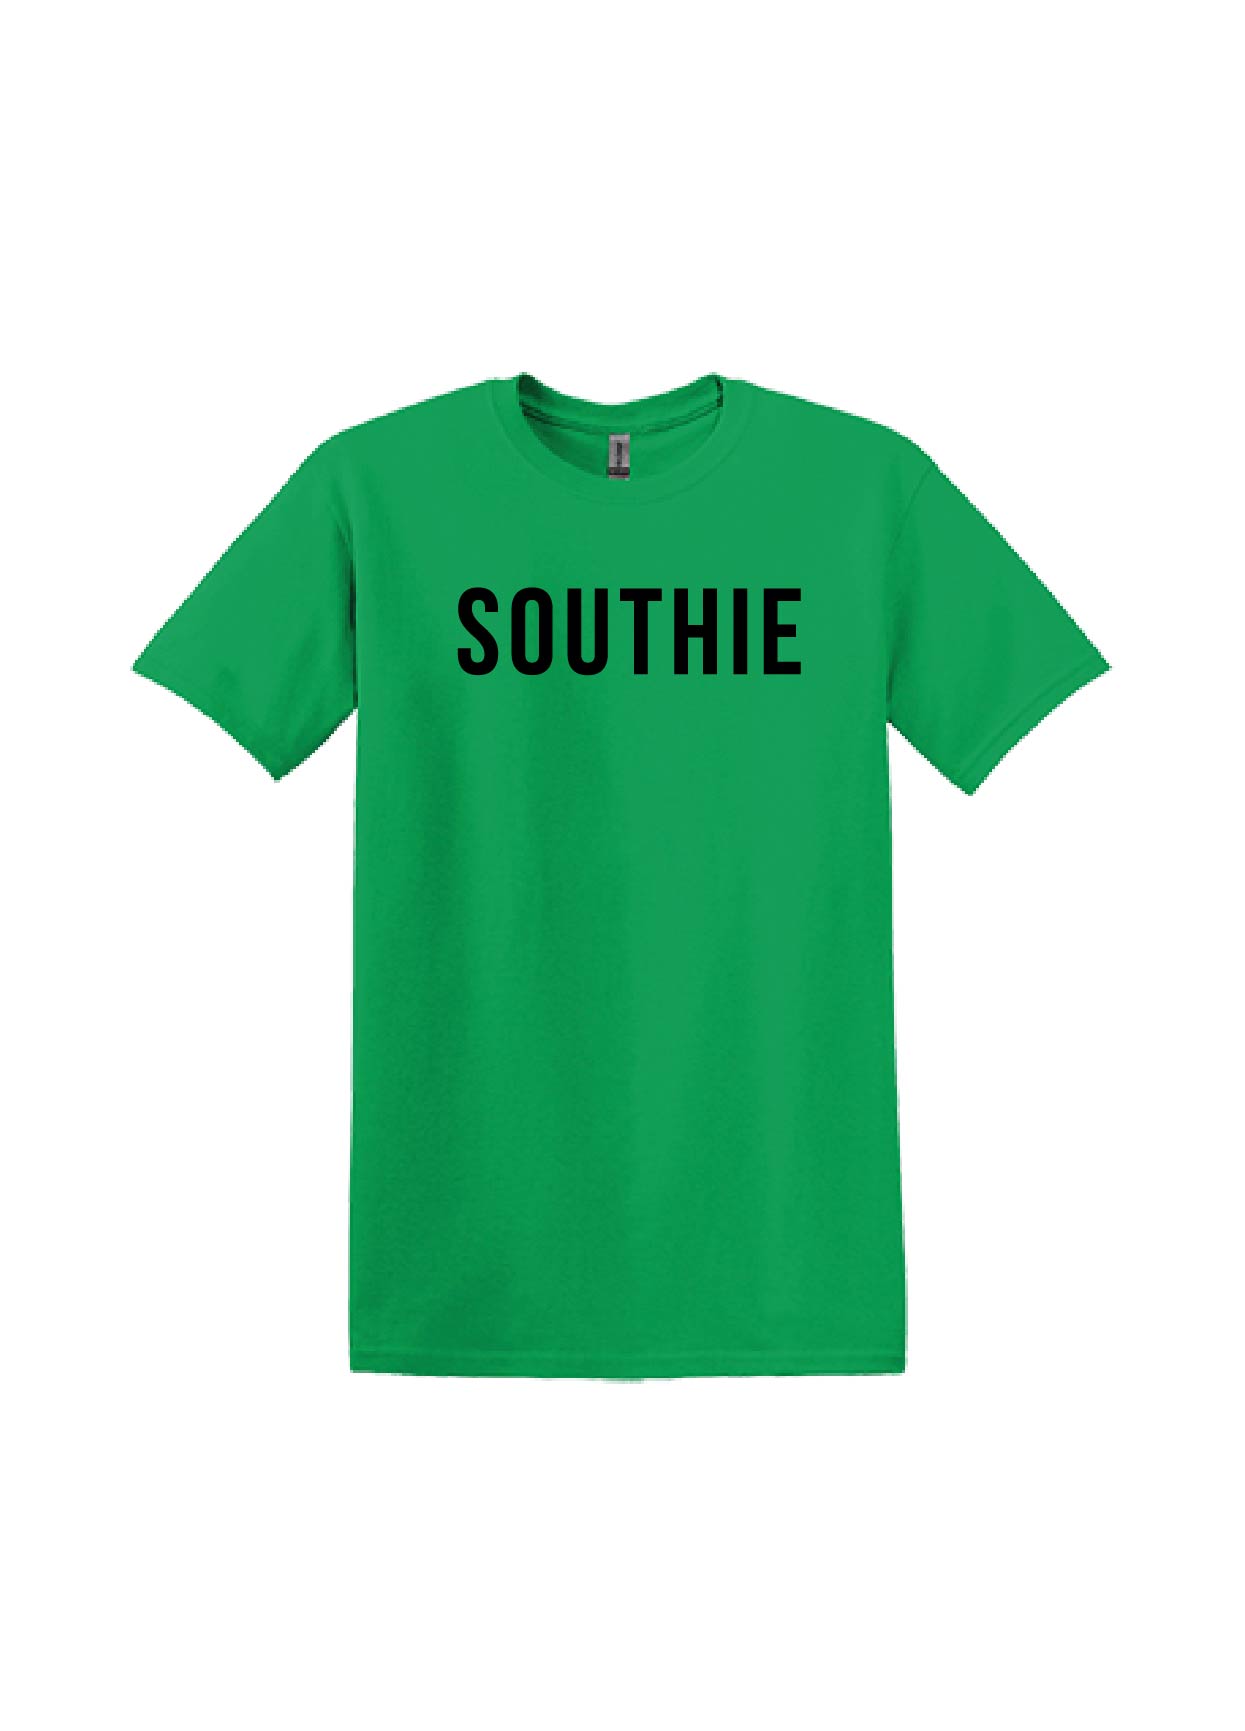 SOUTHIE Tee